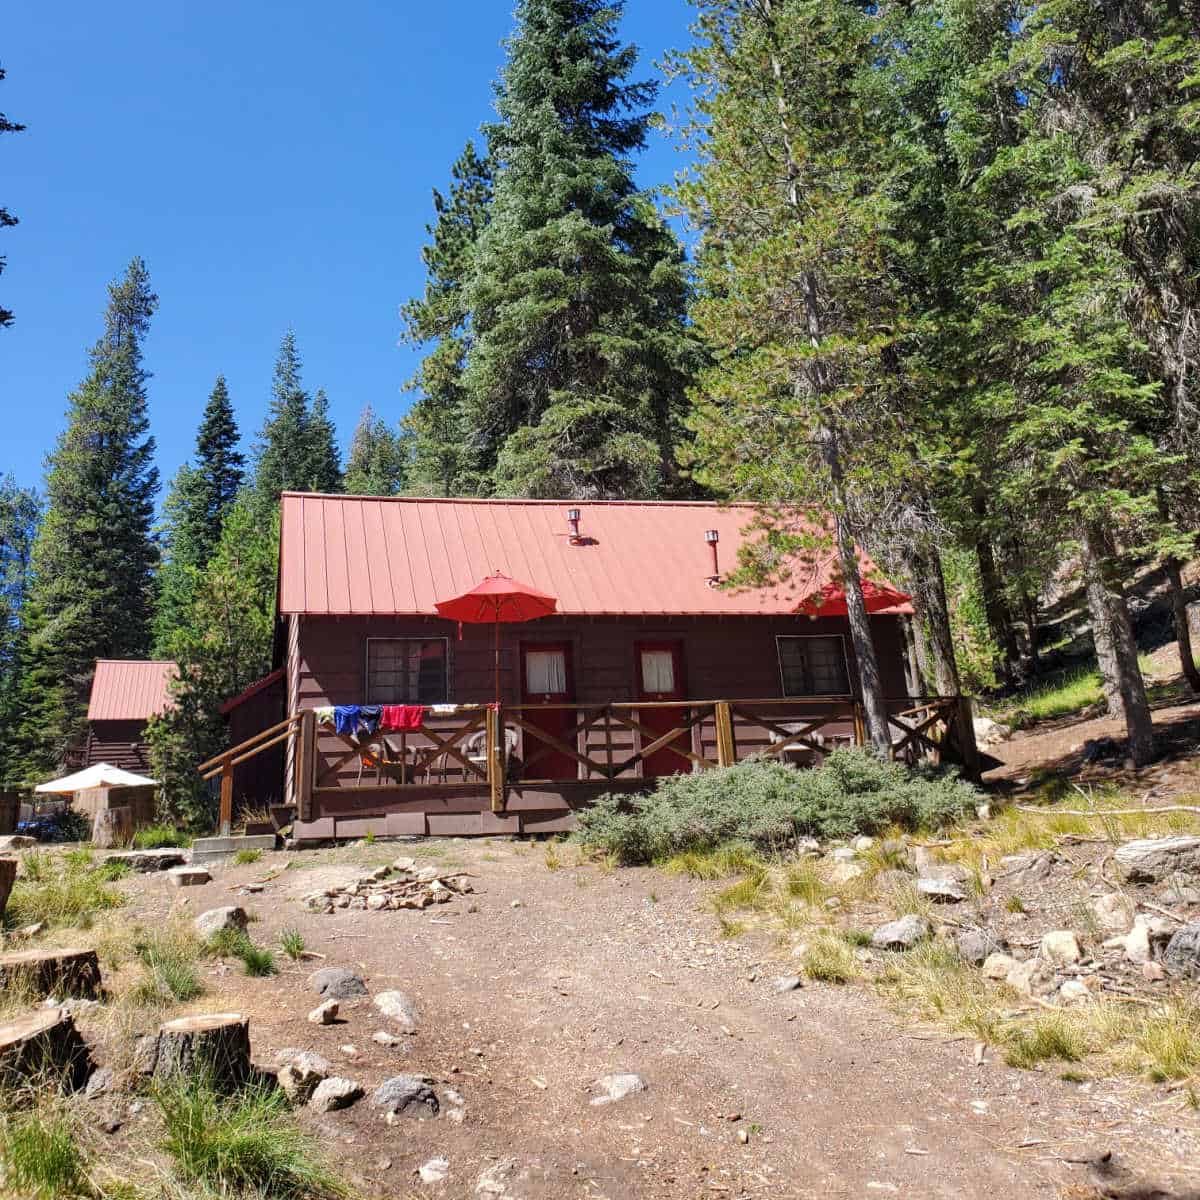 Drakesbad Guest Ranch and Cabins at Lassen Volcanic National Park in California